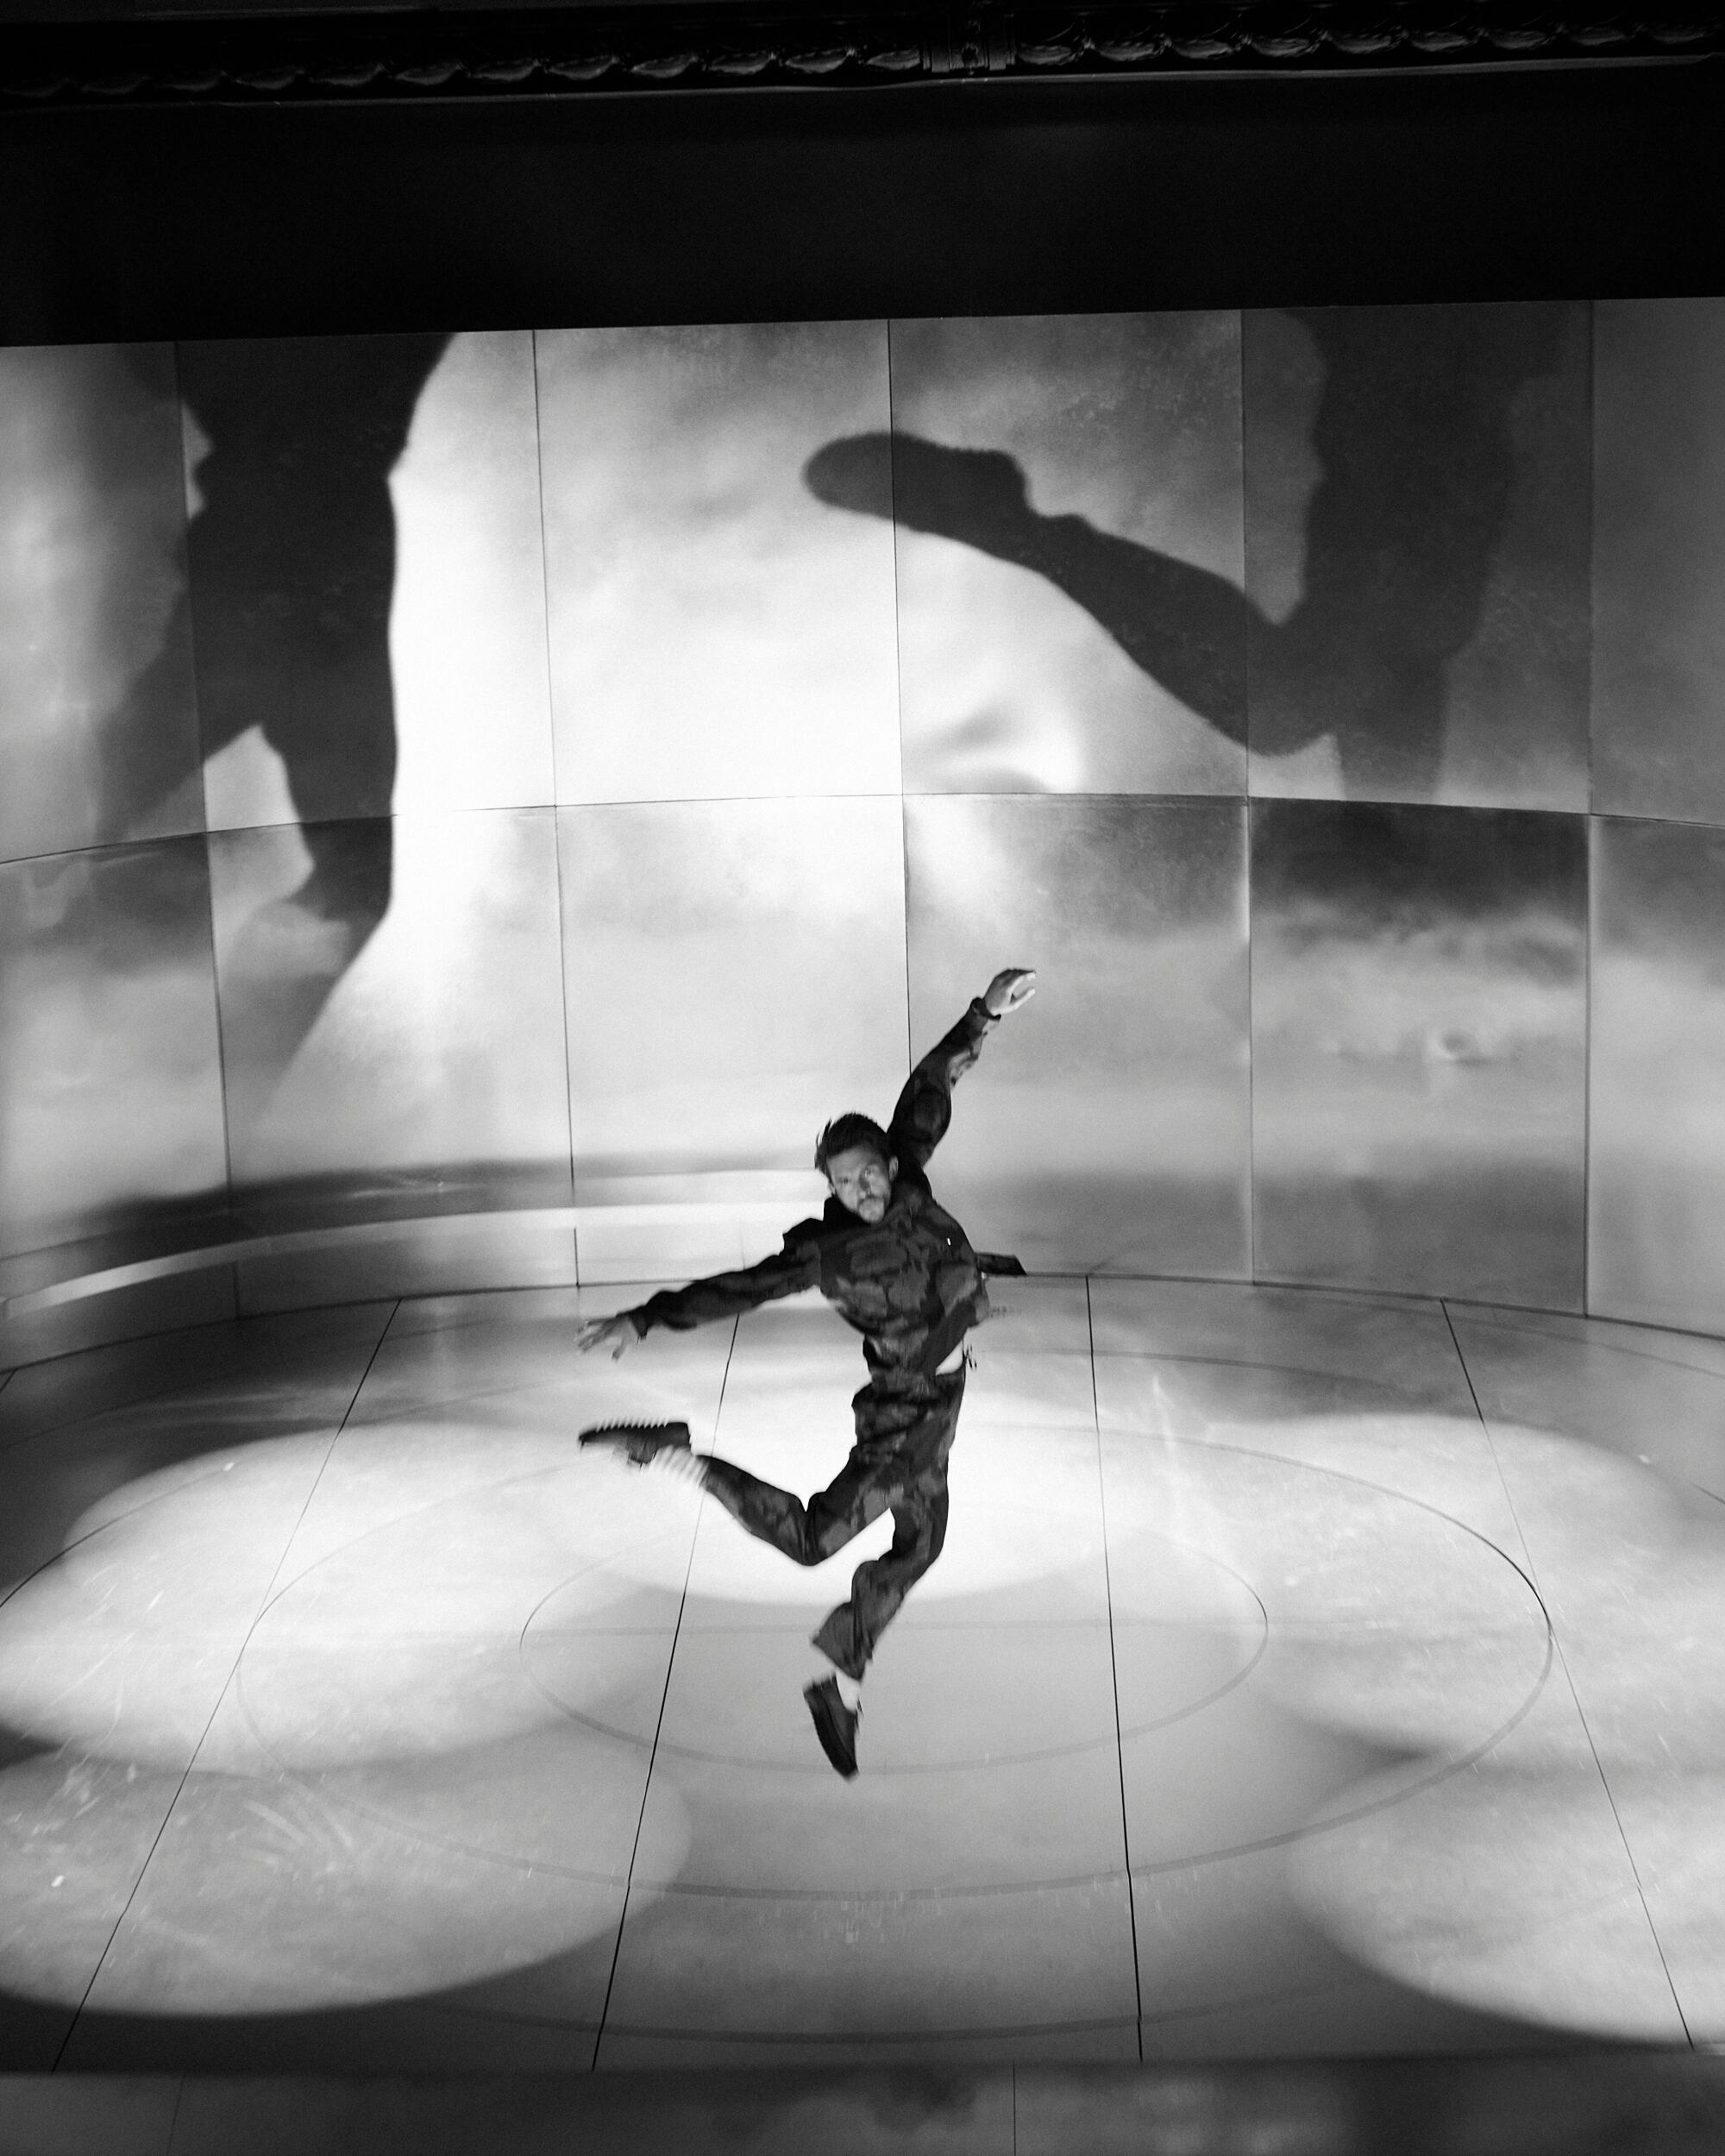 A man jumps in the air on a theater stage.